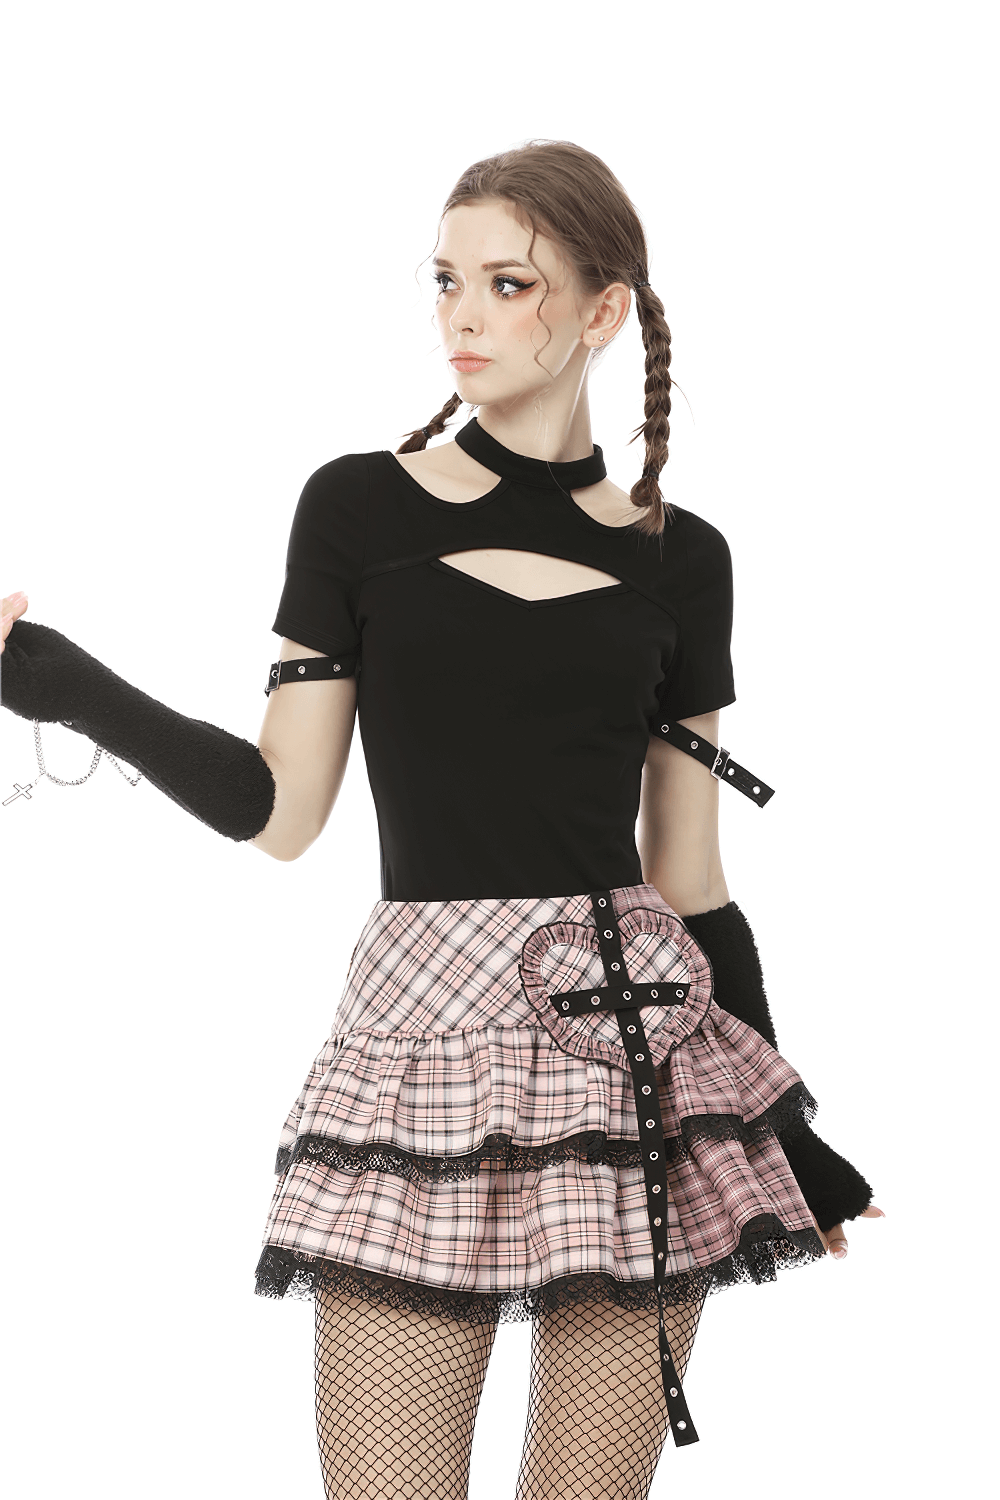 Grunge Female Mini Skirt with Heart Buckle and Grommets